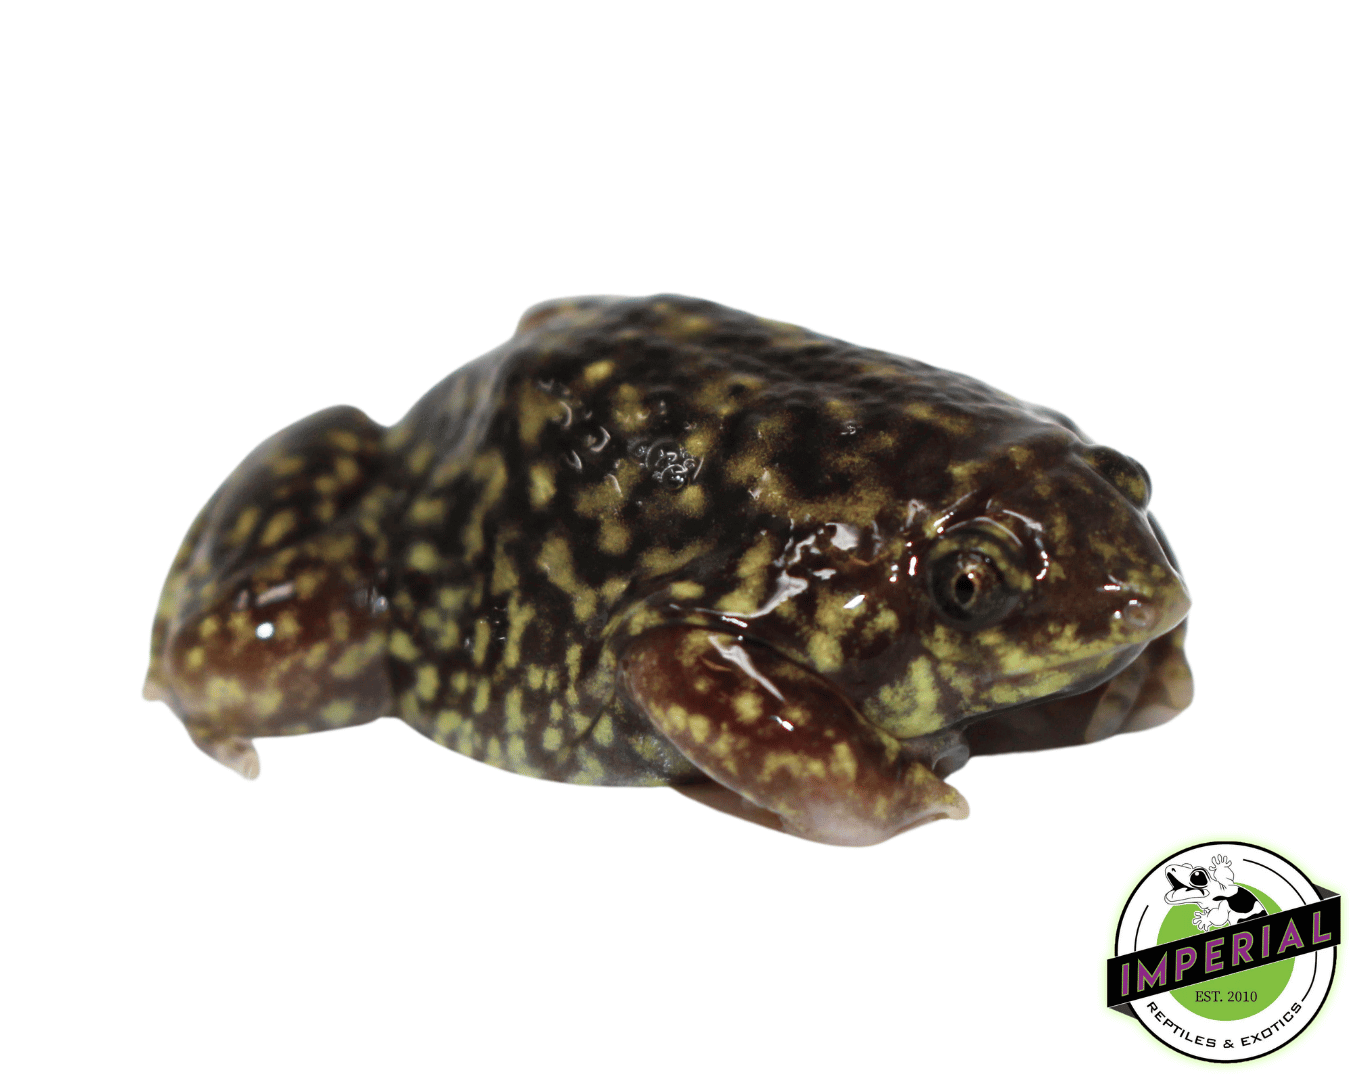 shovel-nose frog for sale online at cheap prices